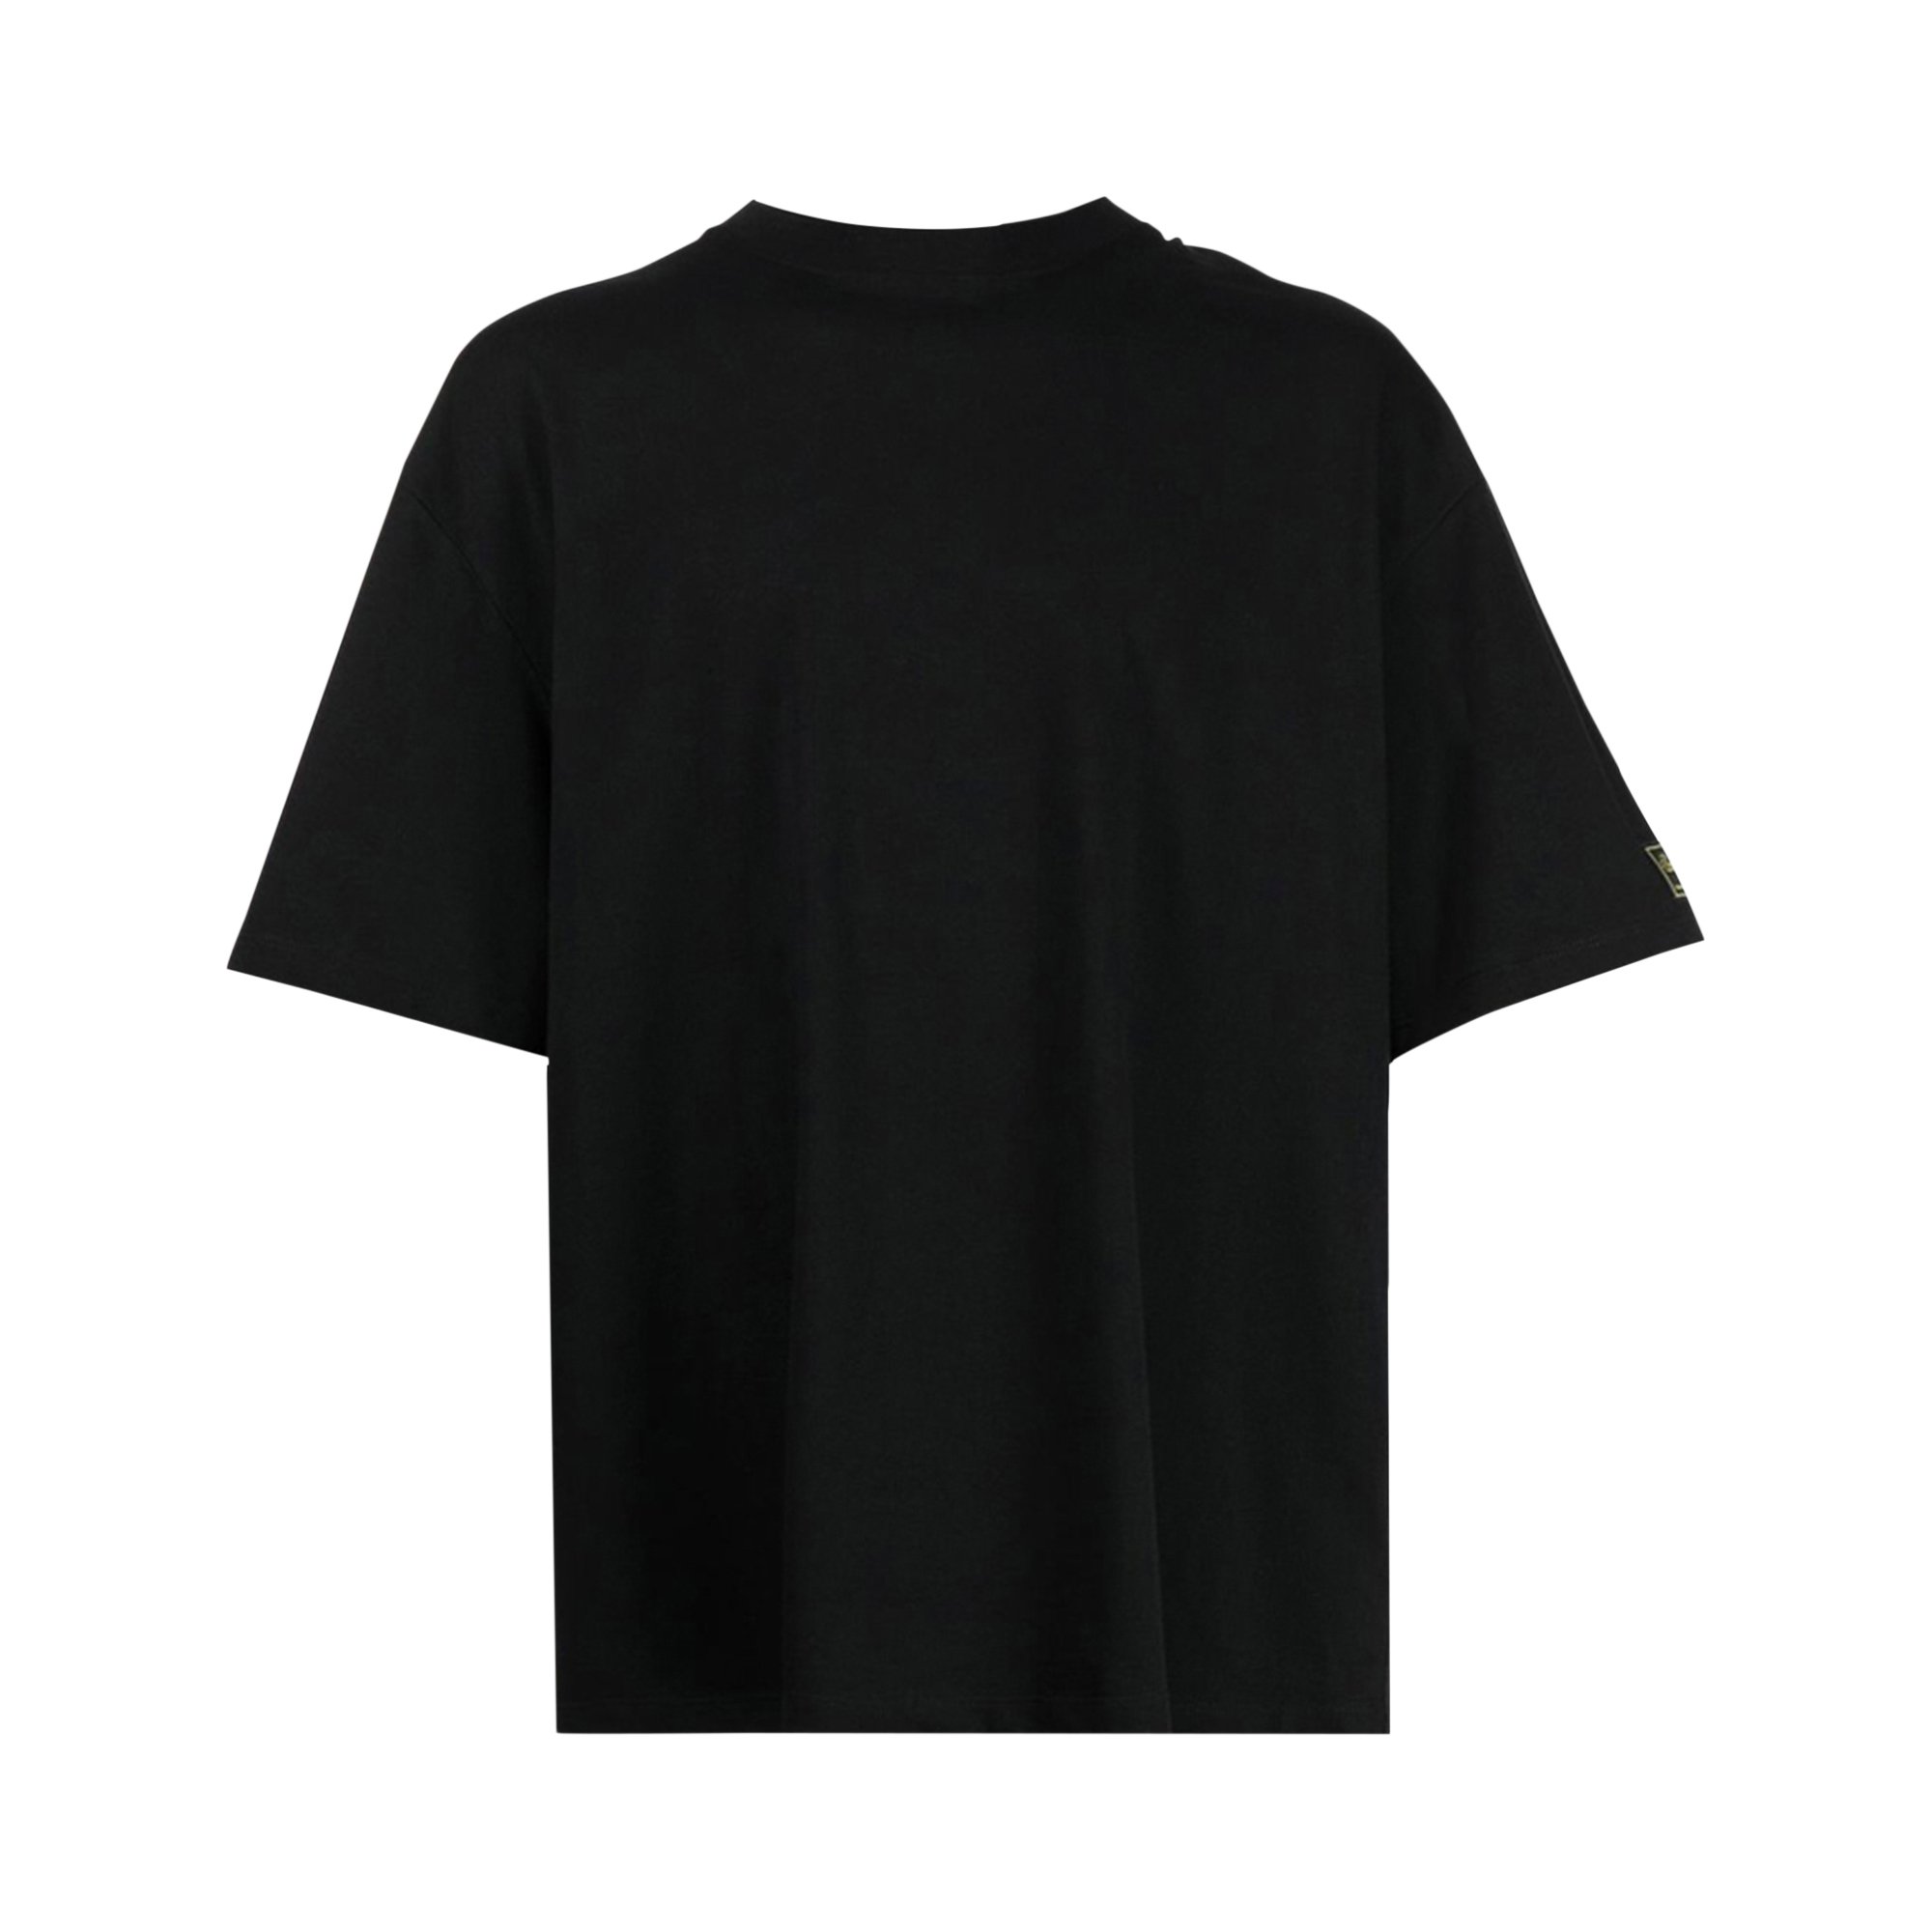 Buy Raf Simons Oversized T-Shirt With Hood Fauves 'Black' - 222